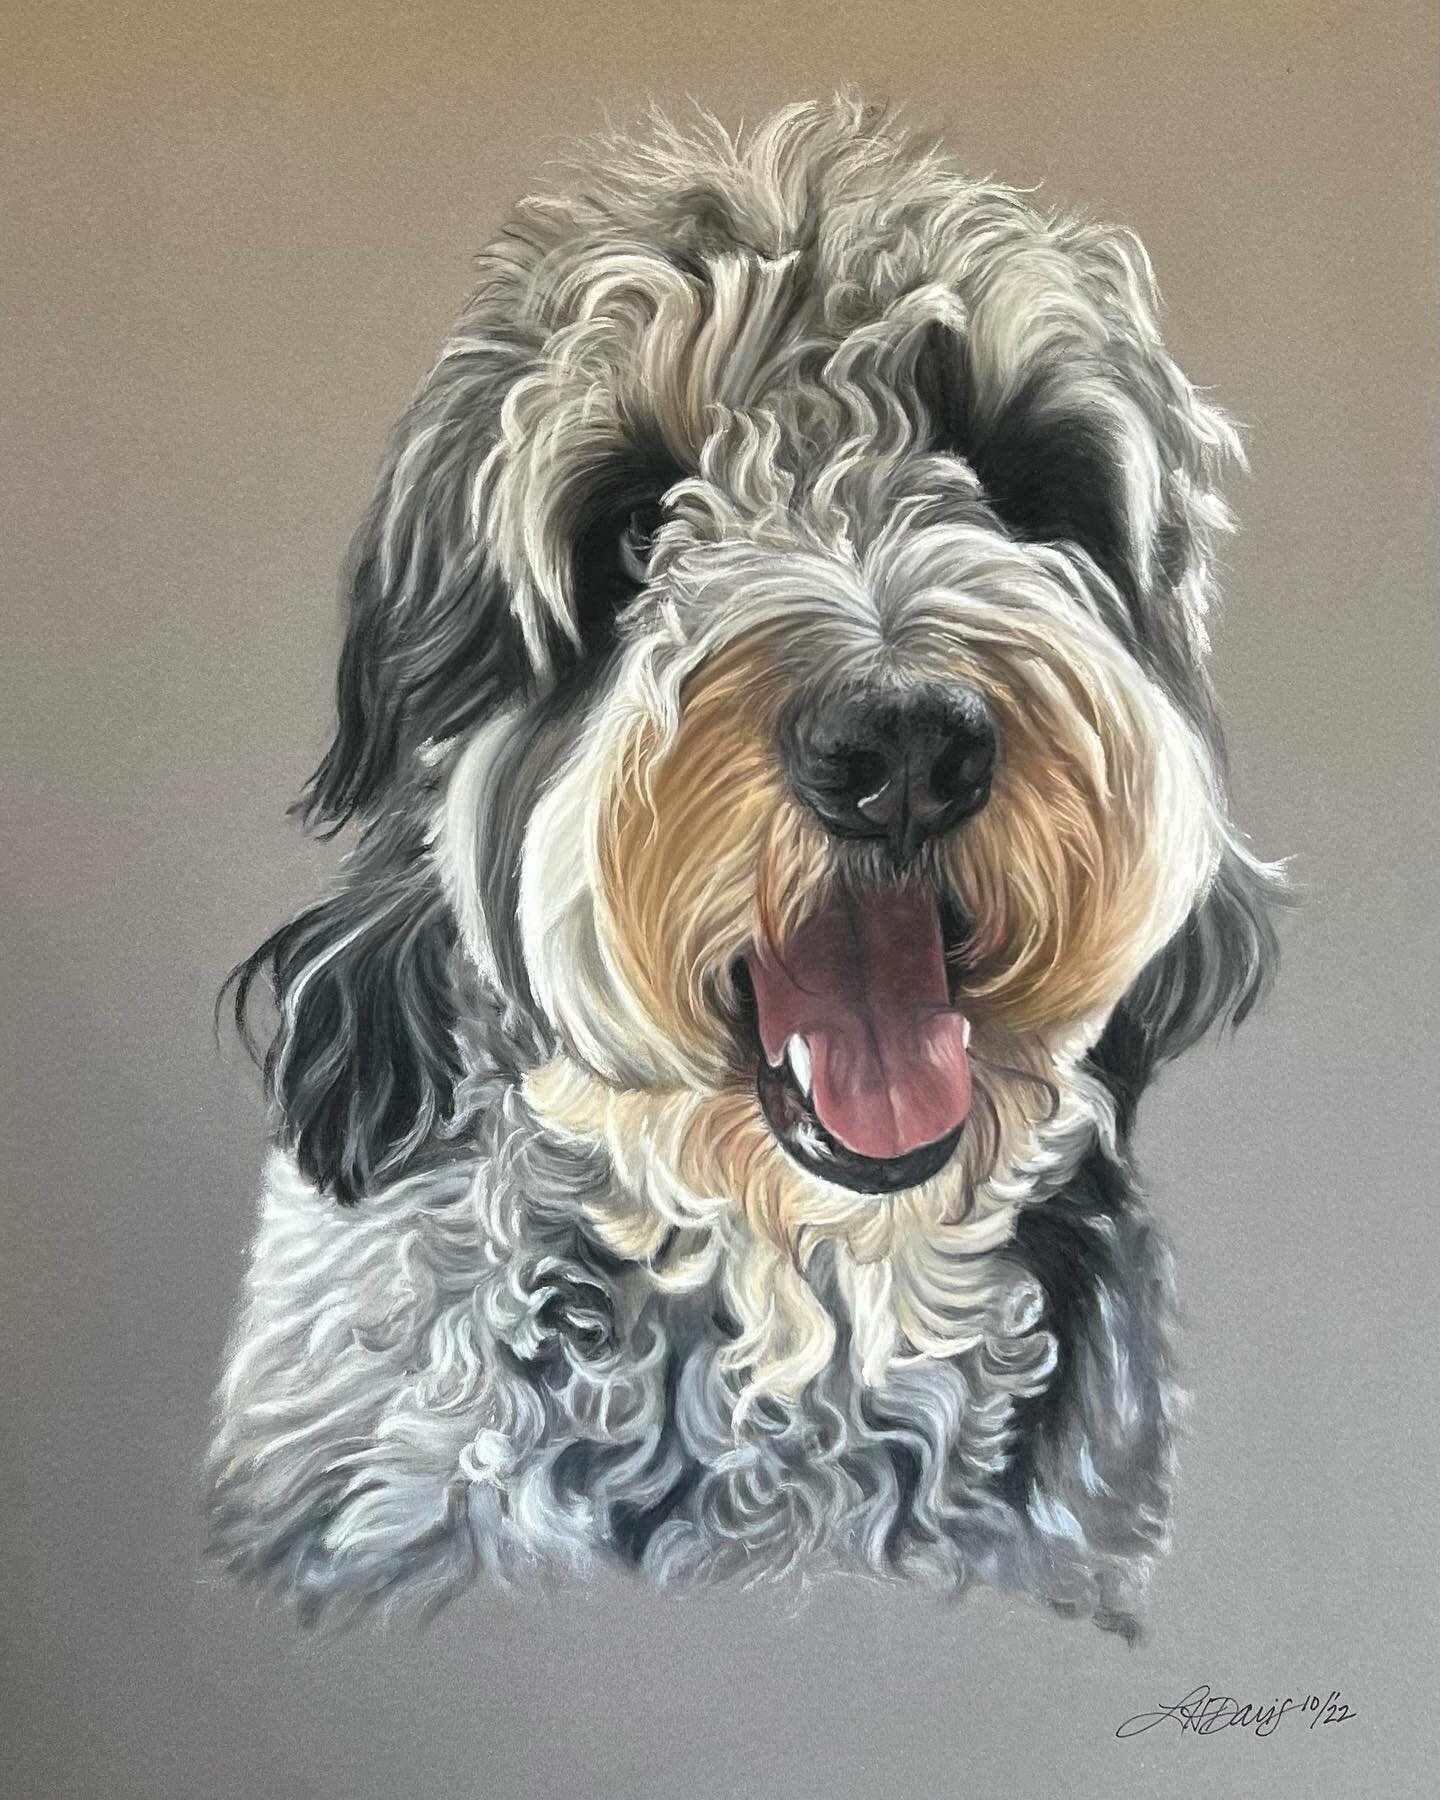 Tito! Another Christmas commission I did over the past months 🥰. What a happy doodle of a chap! 

11&rdquo; x 14&rdquo; Pastel on PastelMat

#pastel #pastelart #pastelartist #petpastelportrait #petportrait #petportraitartist #petcommission #bernedoo